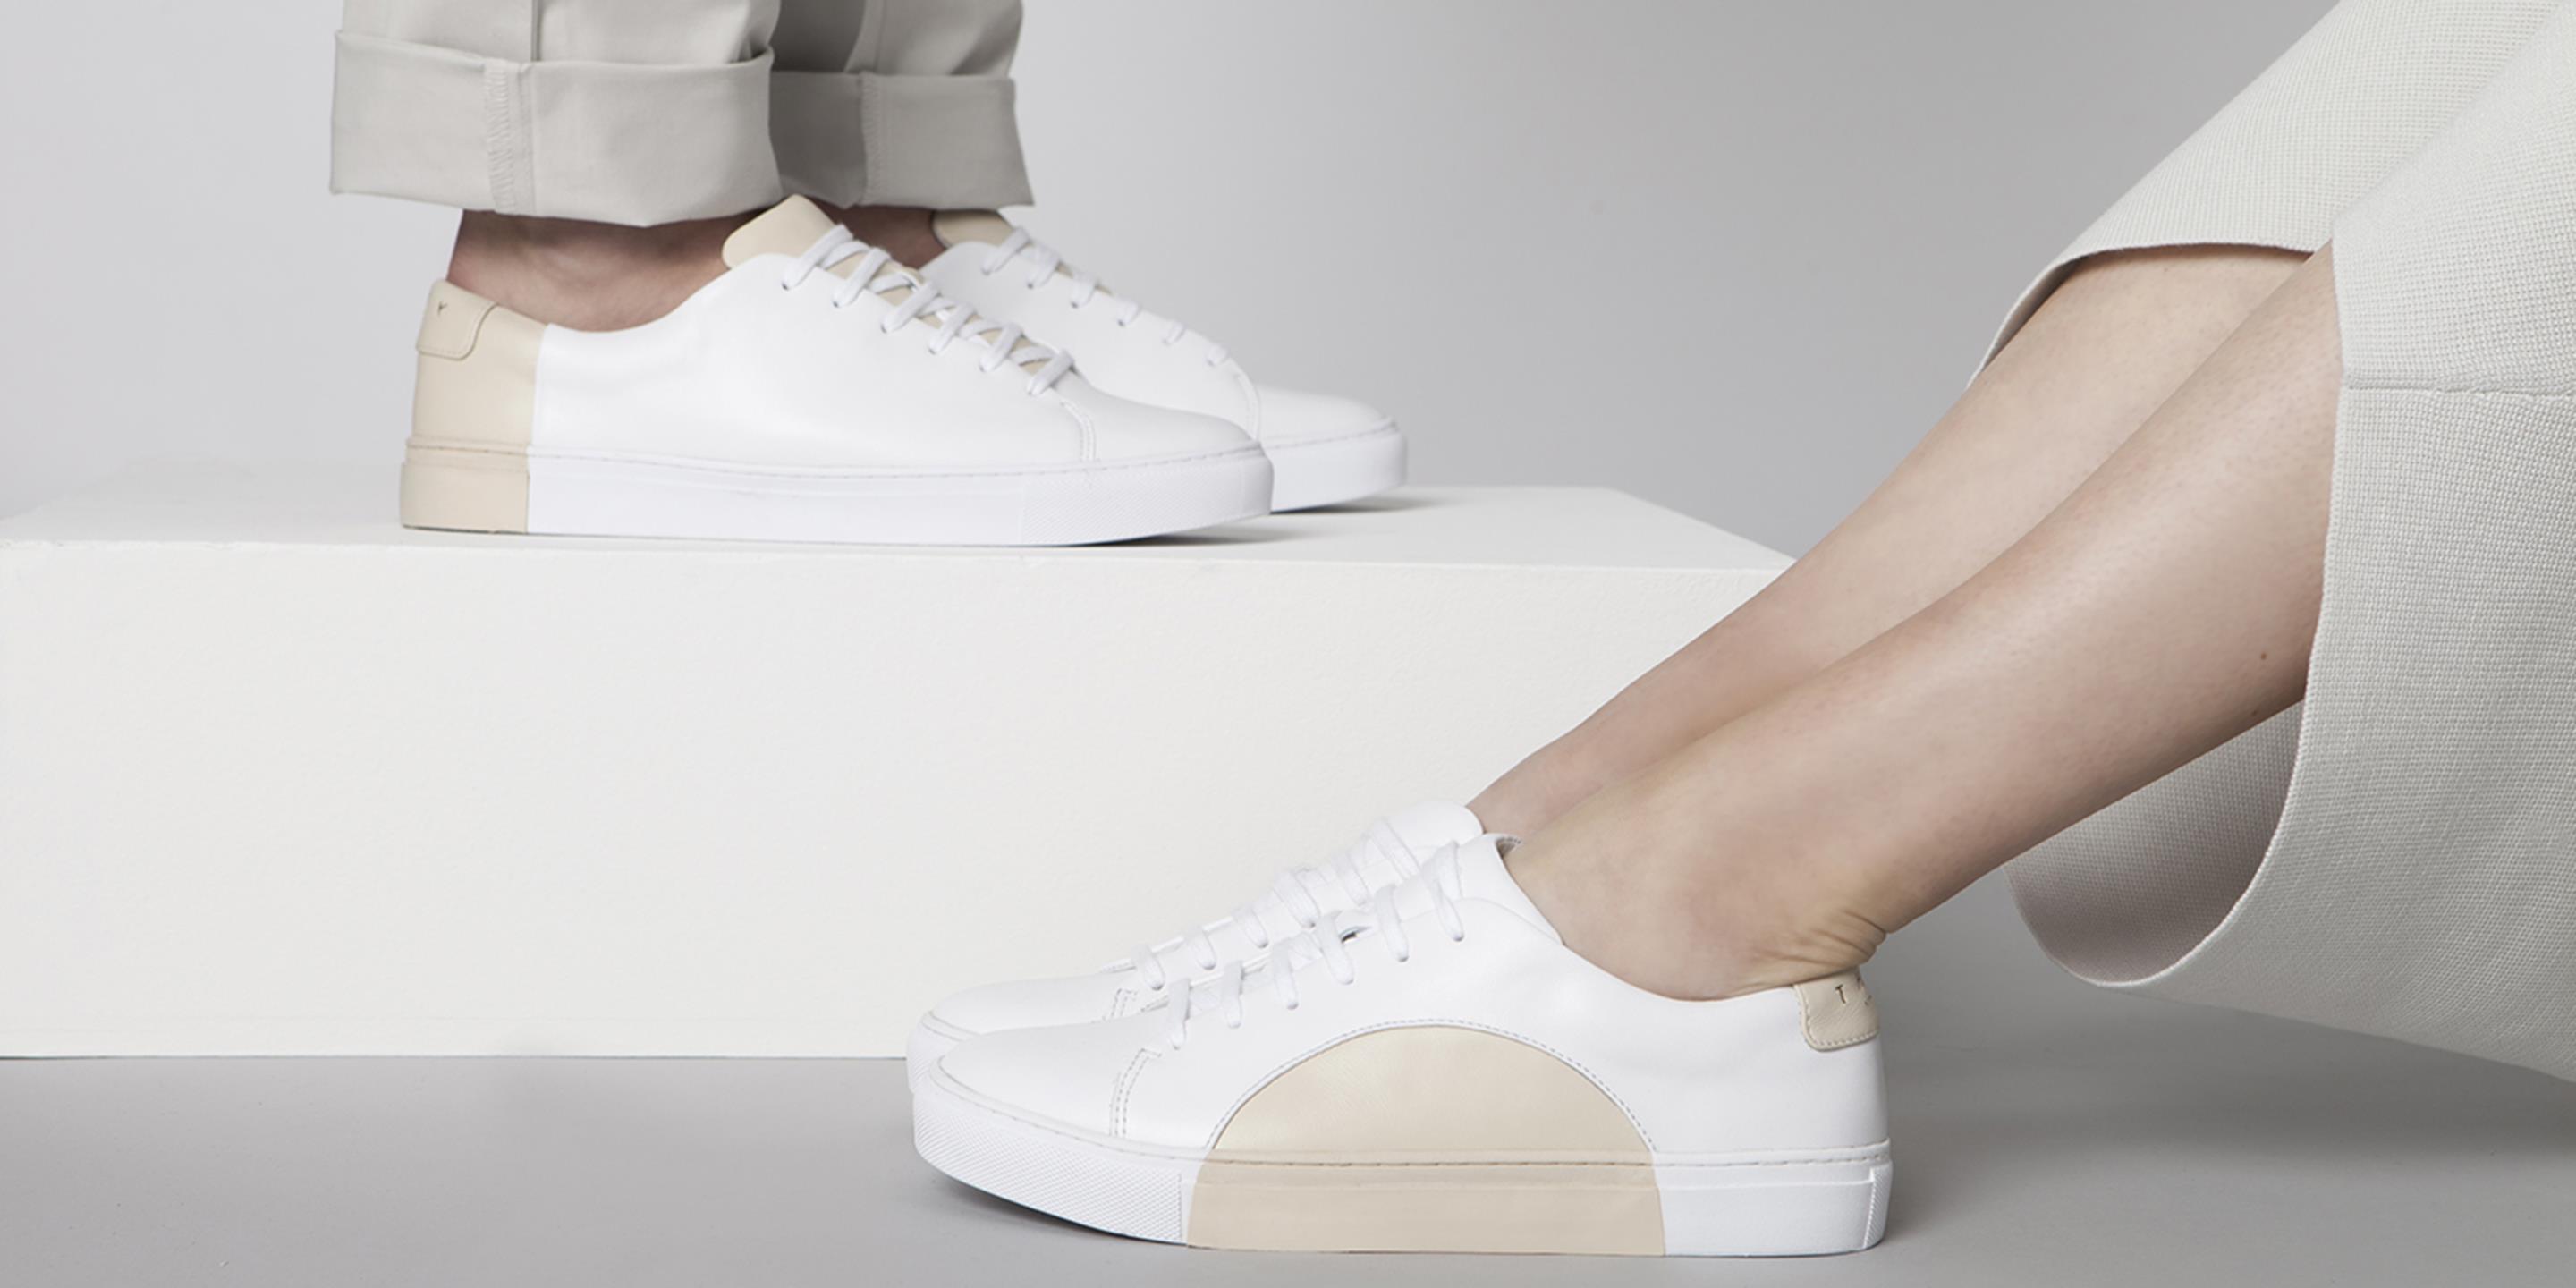 The Most Stylish New Sneakers - Furthermore